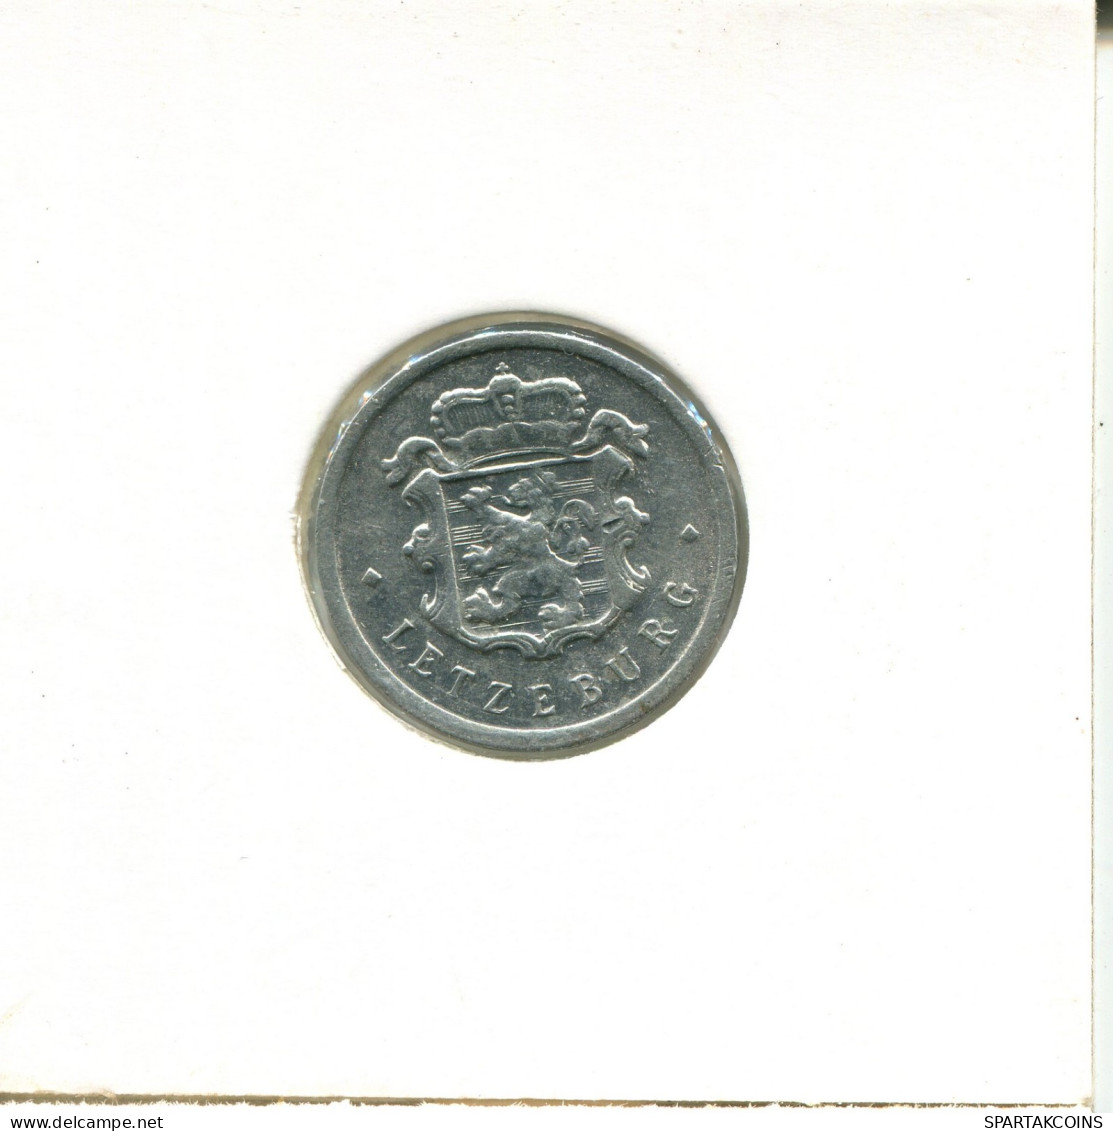 25 CENTIMES 1968 LUXEMBURG LUXEMBOURG Münze #AW651.D.A - Luxembourg